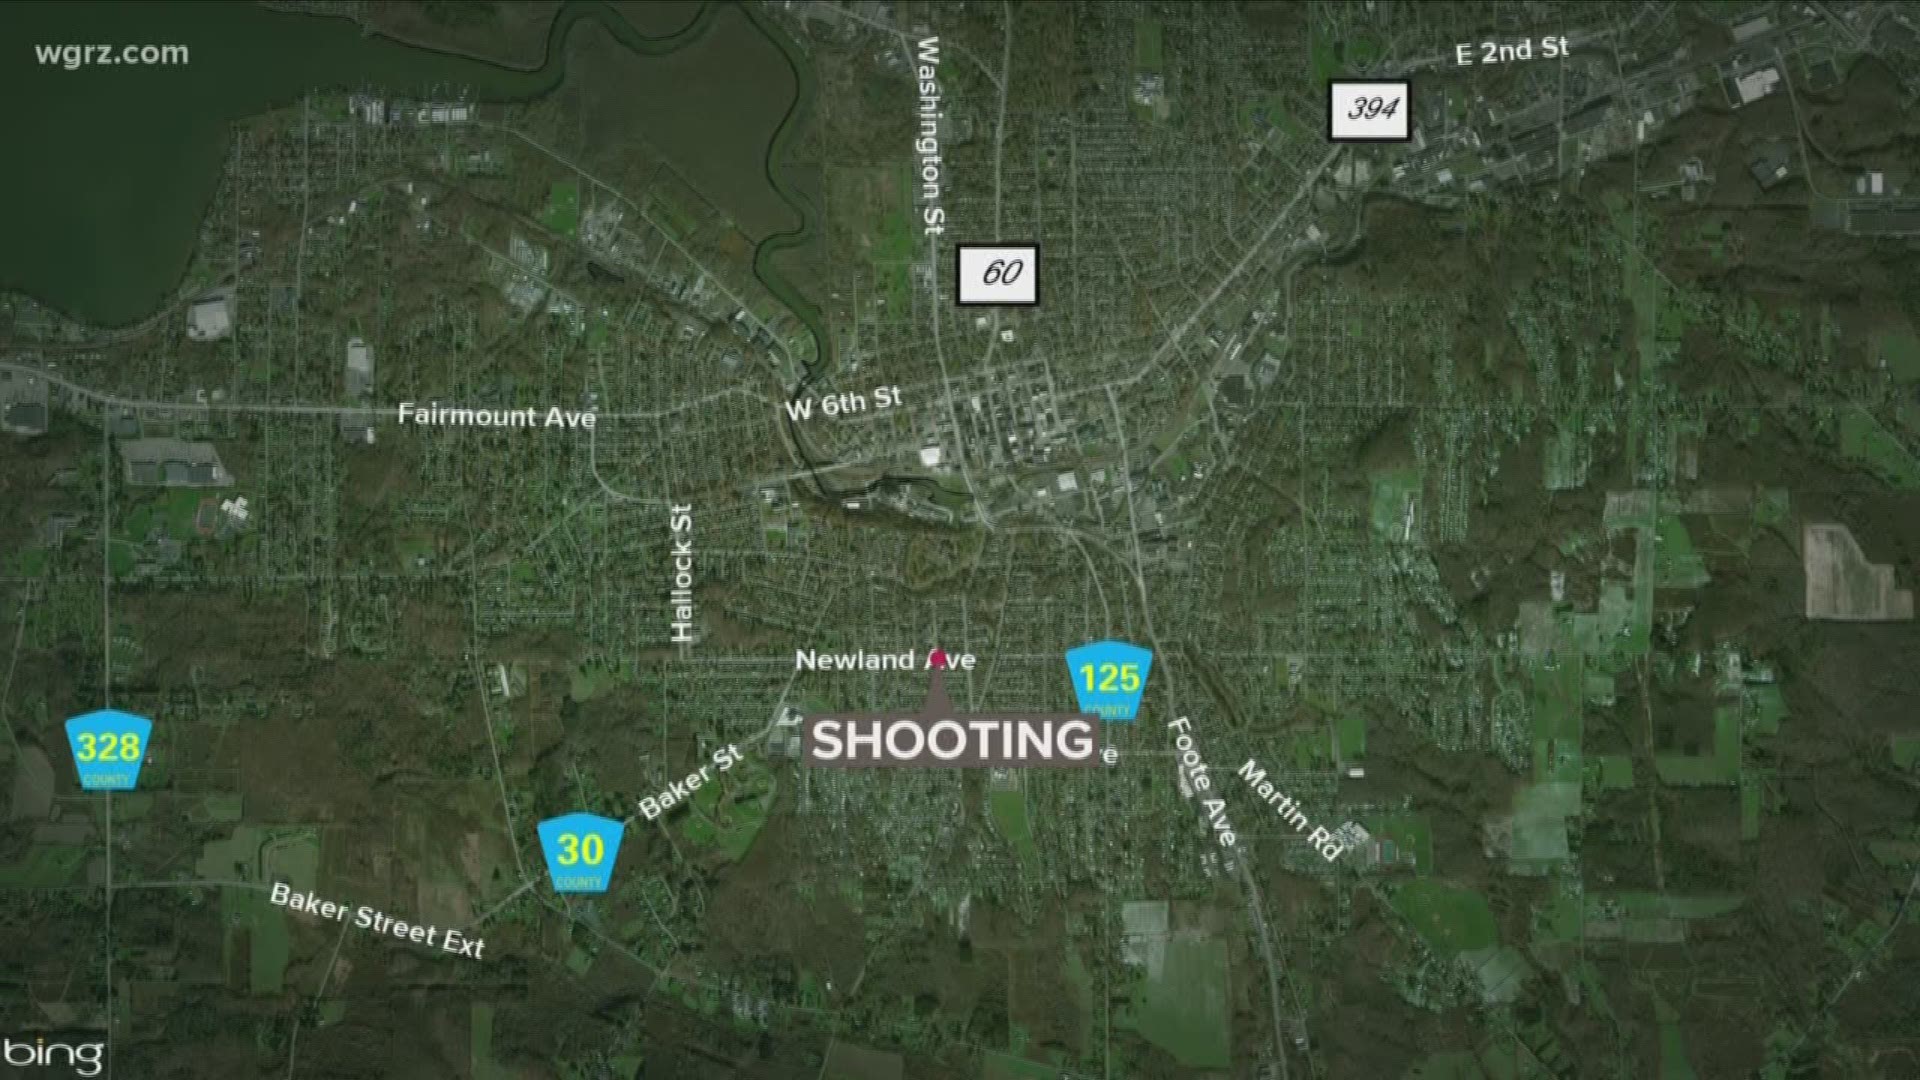 Police say a 22-year-old man was shot multiple times in the leg.